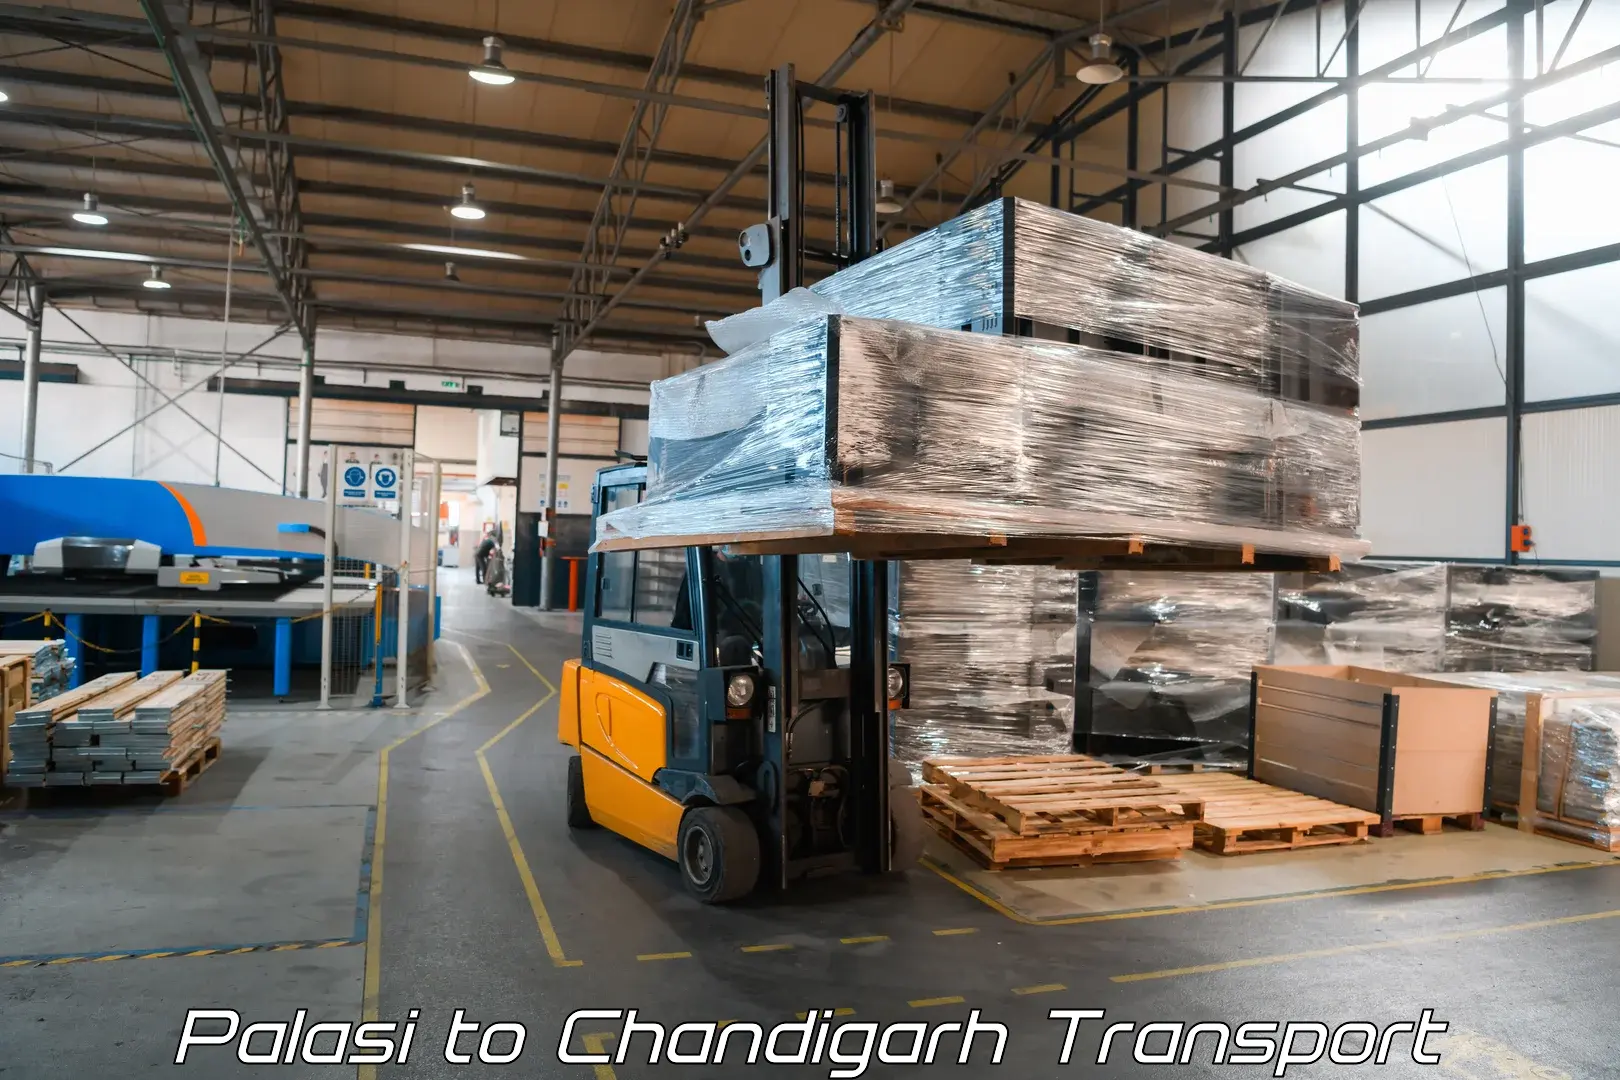 Truck transport companies in India Palasi to Chandigarh